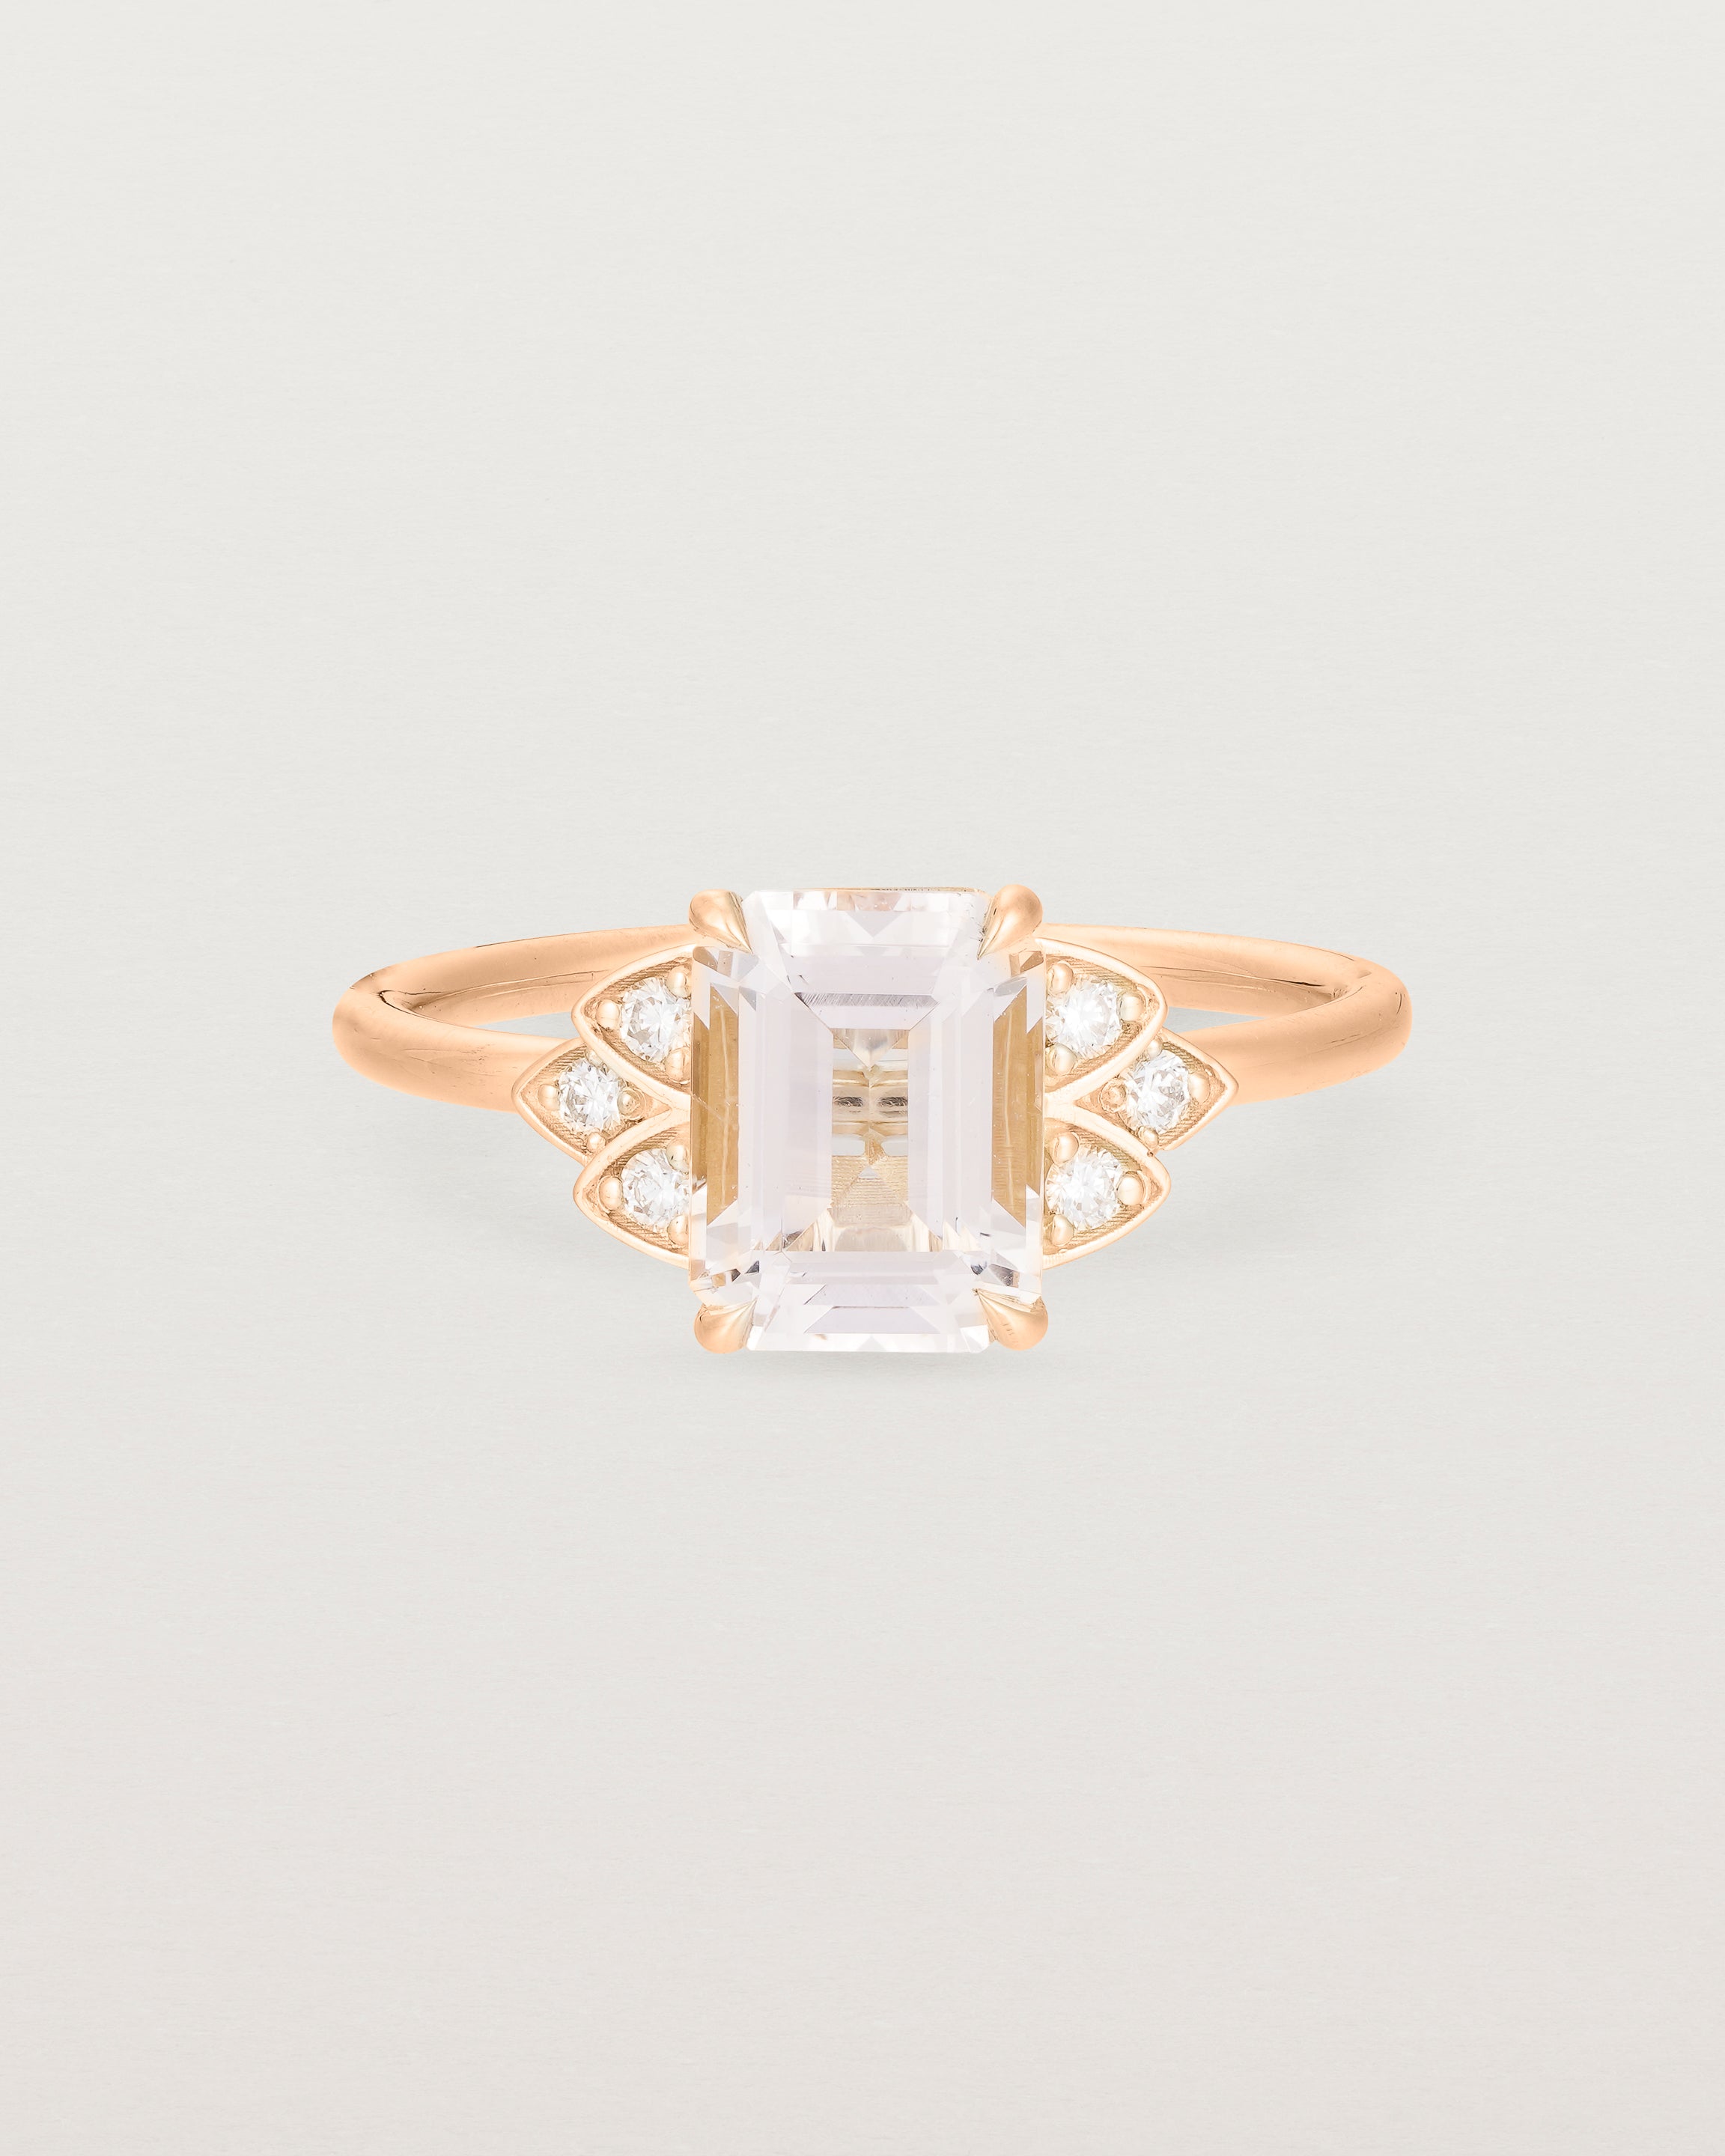 Front view of the Posie Ring | Morganite & Diamonds | Rose Gold.